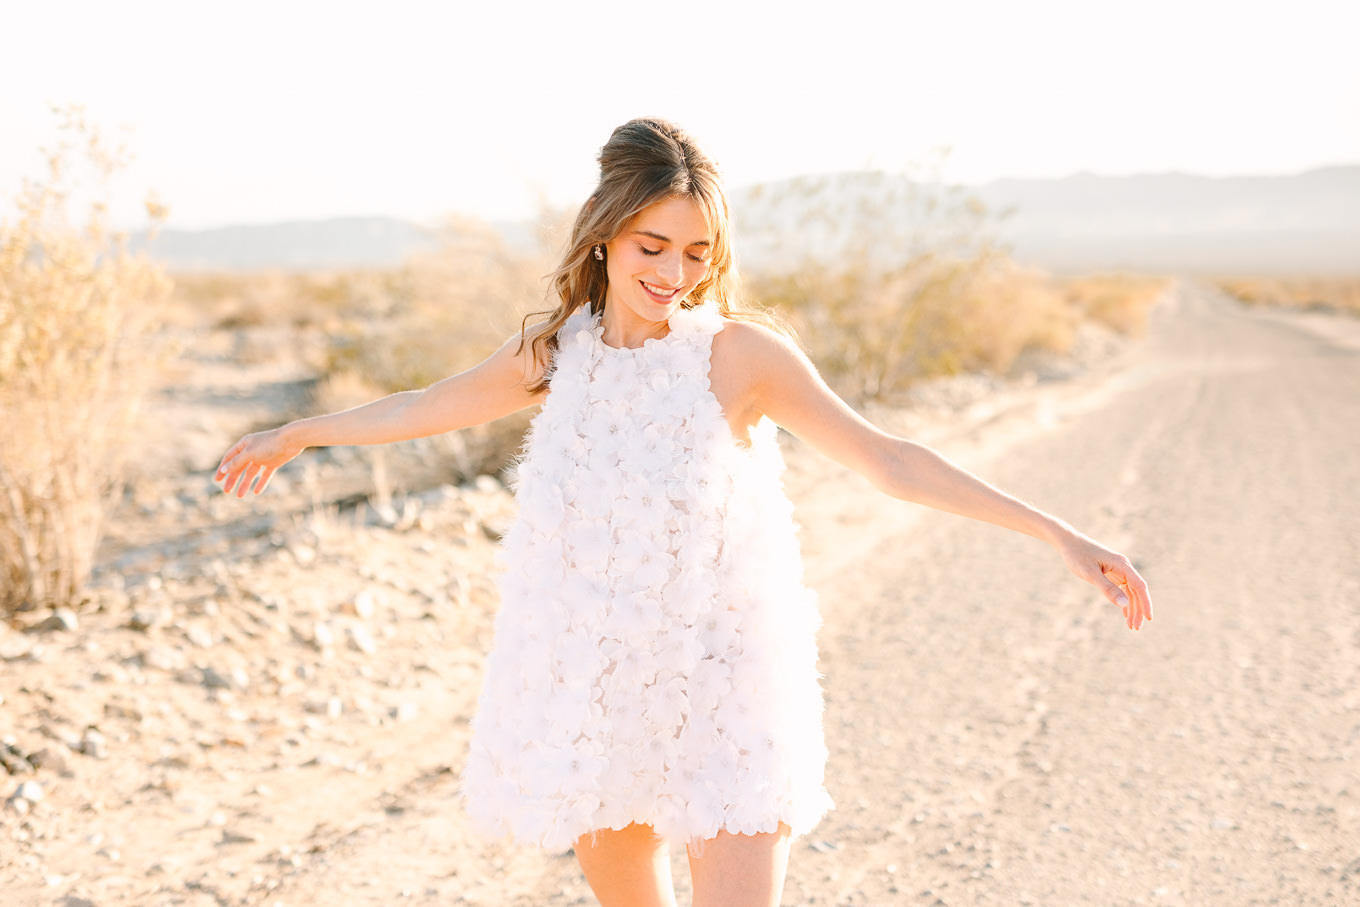 Bridal style with short Naeem Khan feather white dress| Kindred Presets x Mary Costa Photography Palm Springs Ad Campaign | Colorful Palm Springs wedding photography | #palmspringsphotographer #lightroompresets #sandshotel #pinkhotel   Source: Mary Costa Photography | Los Angeles